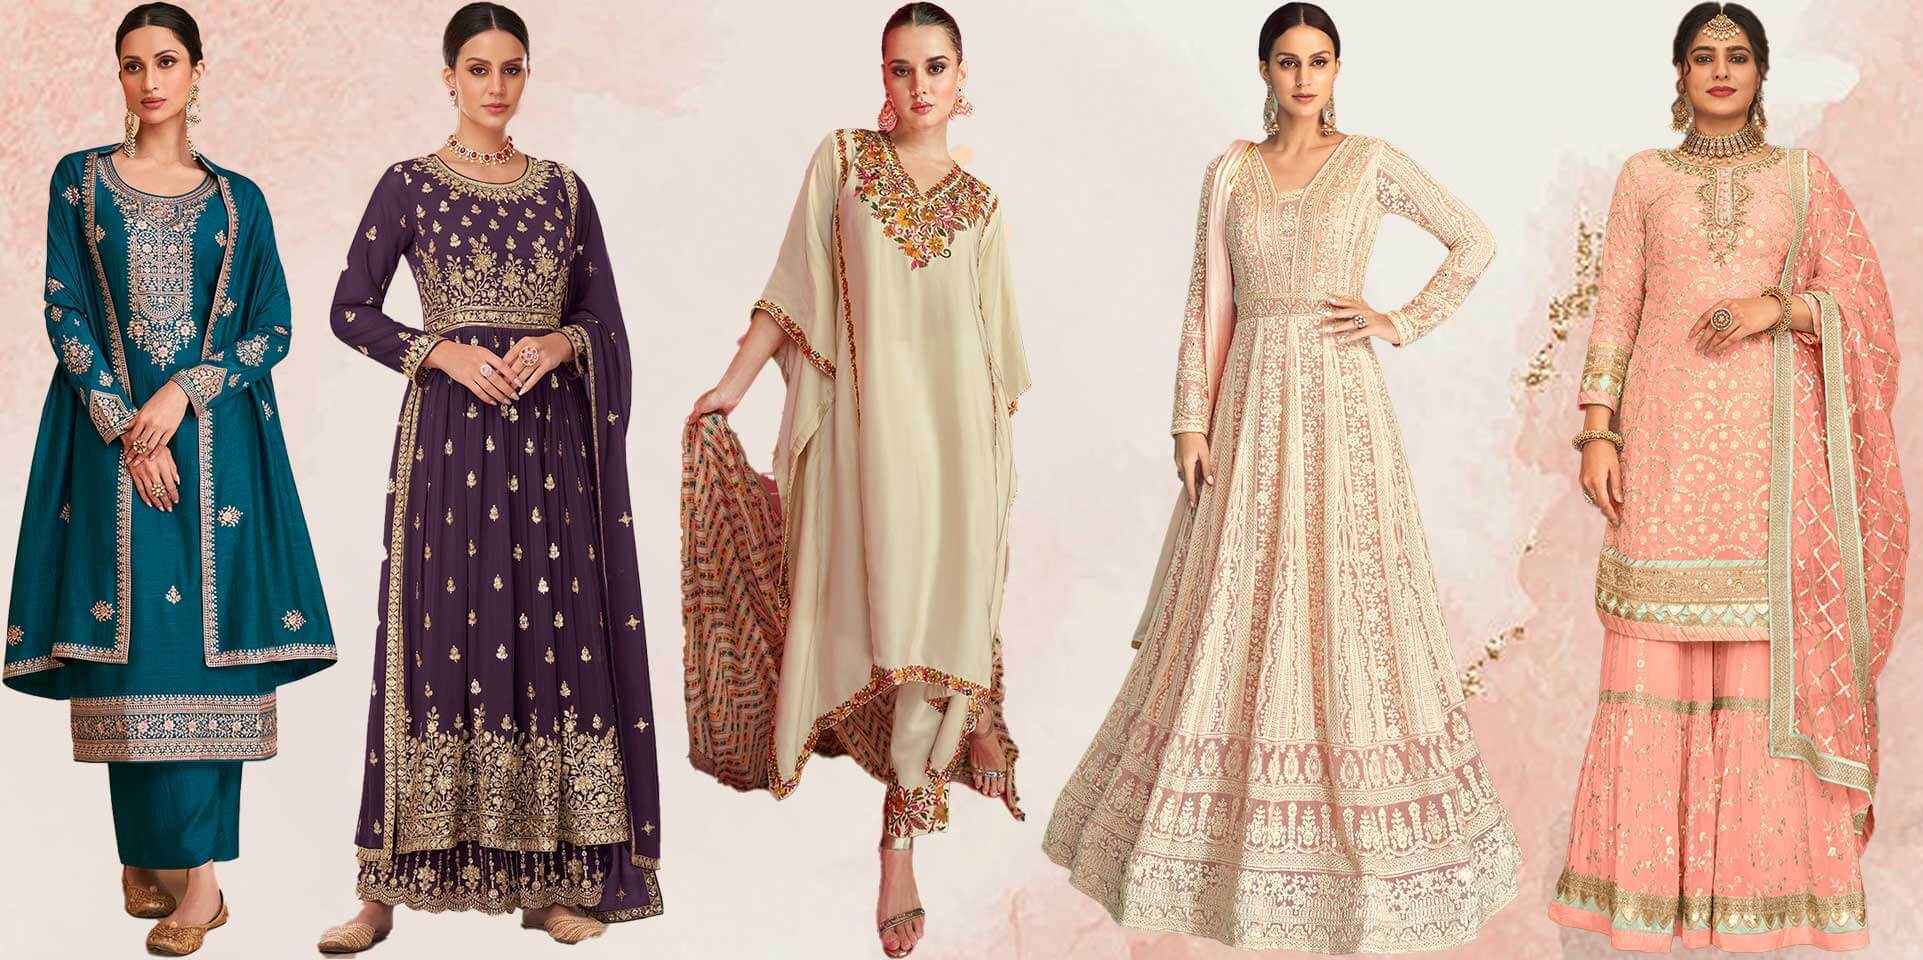 Stepping Out in Style: What to Wear to a Diwali Celebration as a Non-I